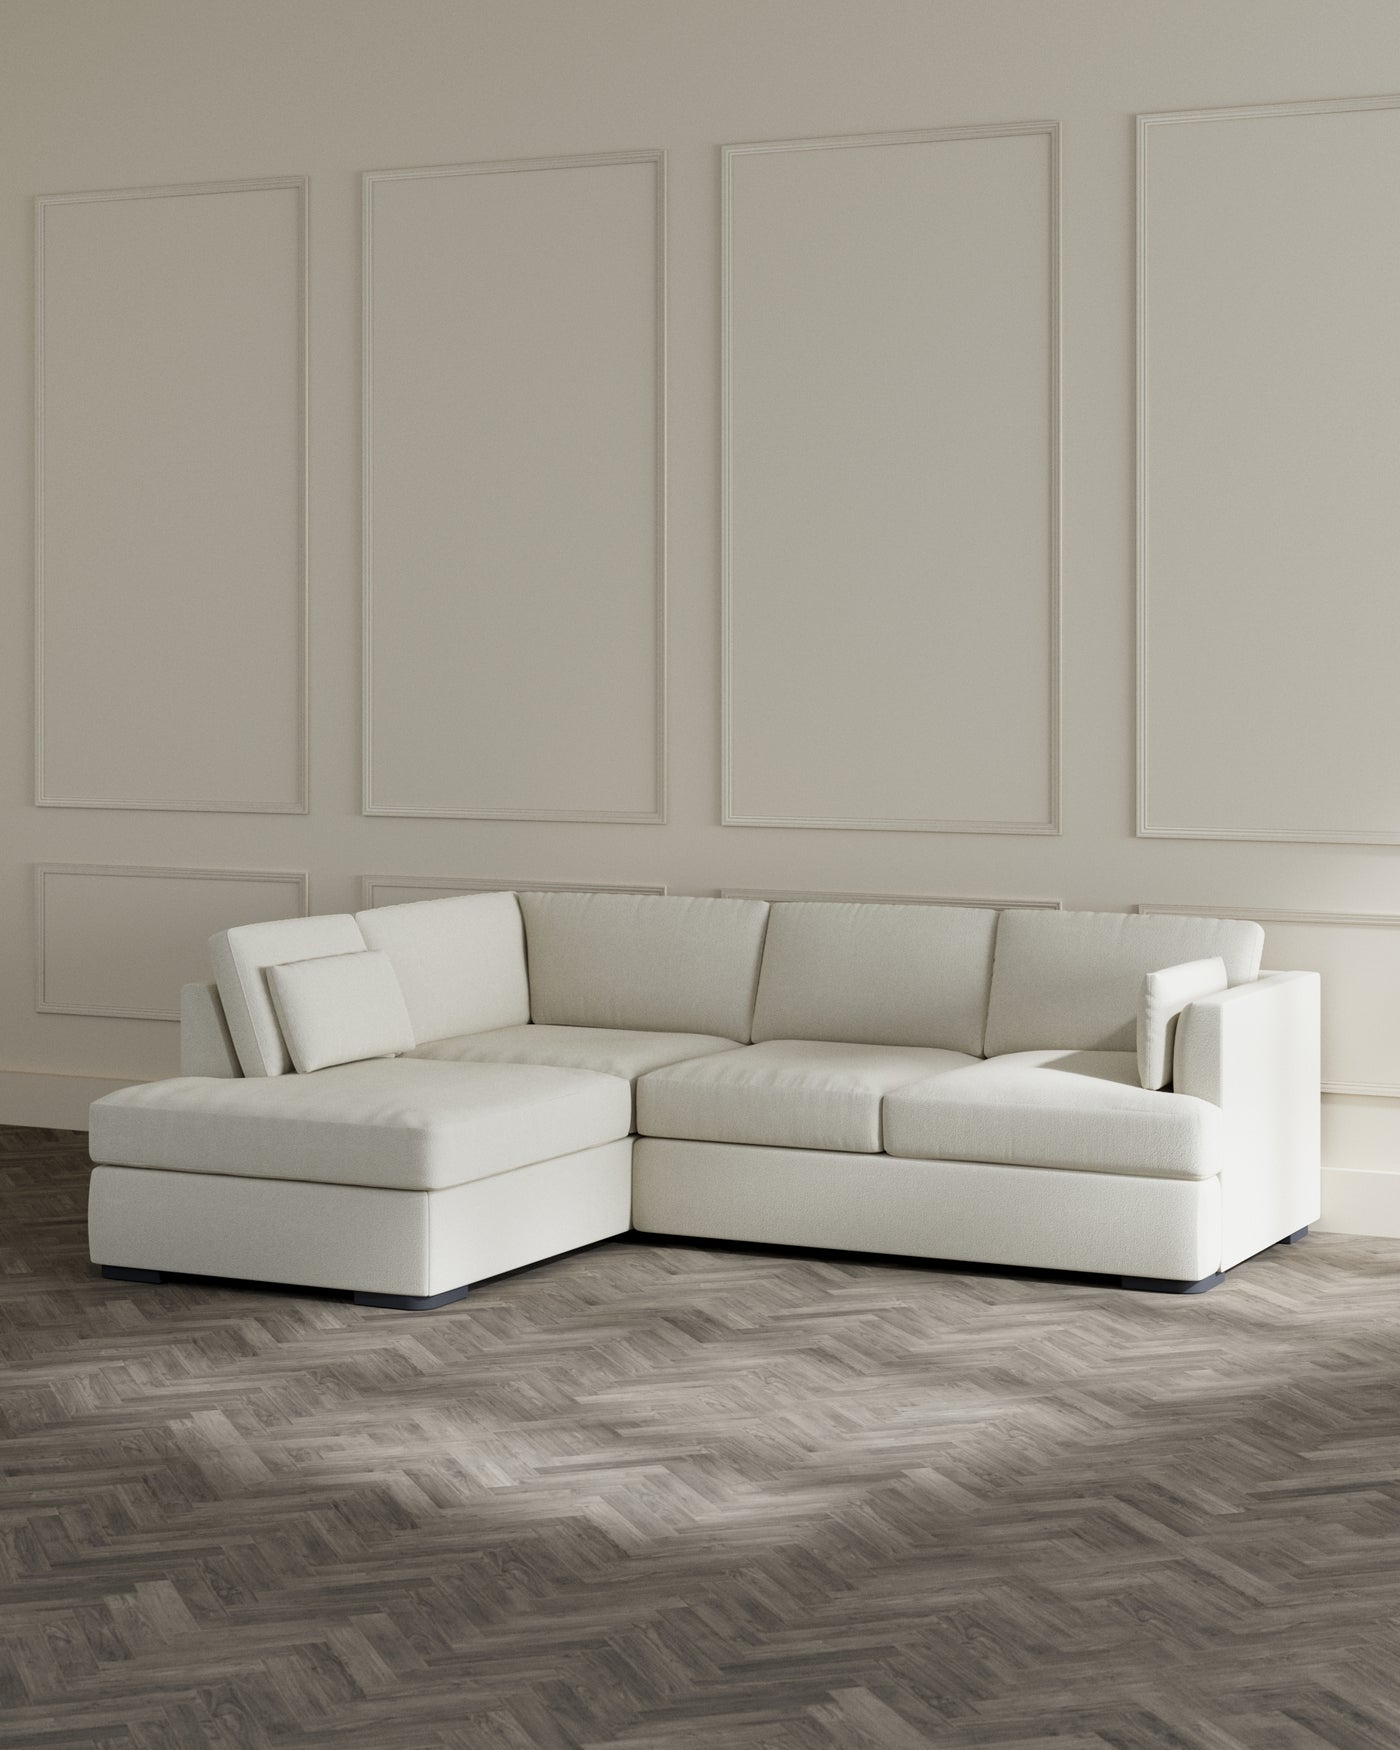 Modern L-shaped sectional sofa with a chaise lounge in a creamy white fabric, placed in a minimalist room with chic wall panelling and herringbone patterned wooden flooring.